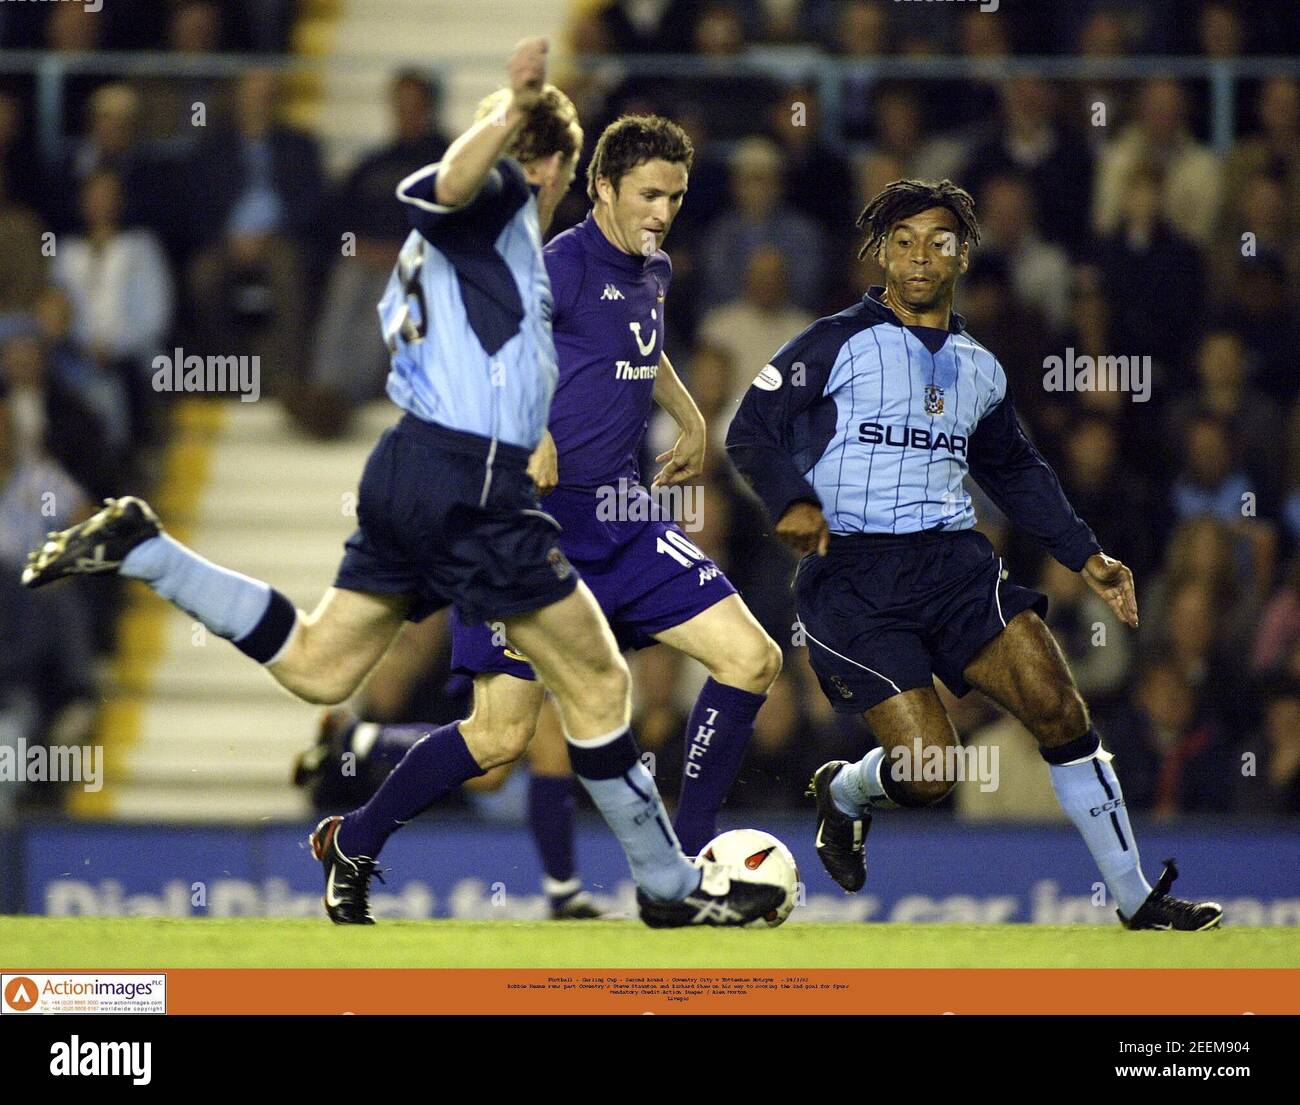 Football - Carling Cup - Second Round - Coventry City v Tottenham Hotspur  - 24/9/03  Robbie Keane runs past Coventry's Steve Staunton and Richard Shaw on his way to scoring the 2nd goal for Spurs  Mandatory Credit:Action Images / Alex Morton  Livepic Stock Photo